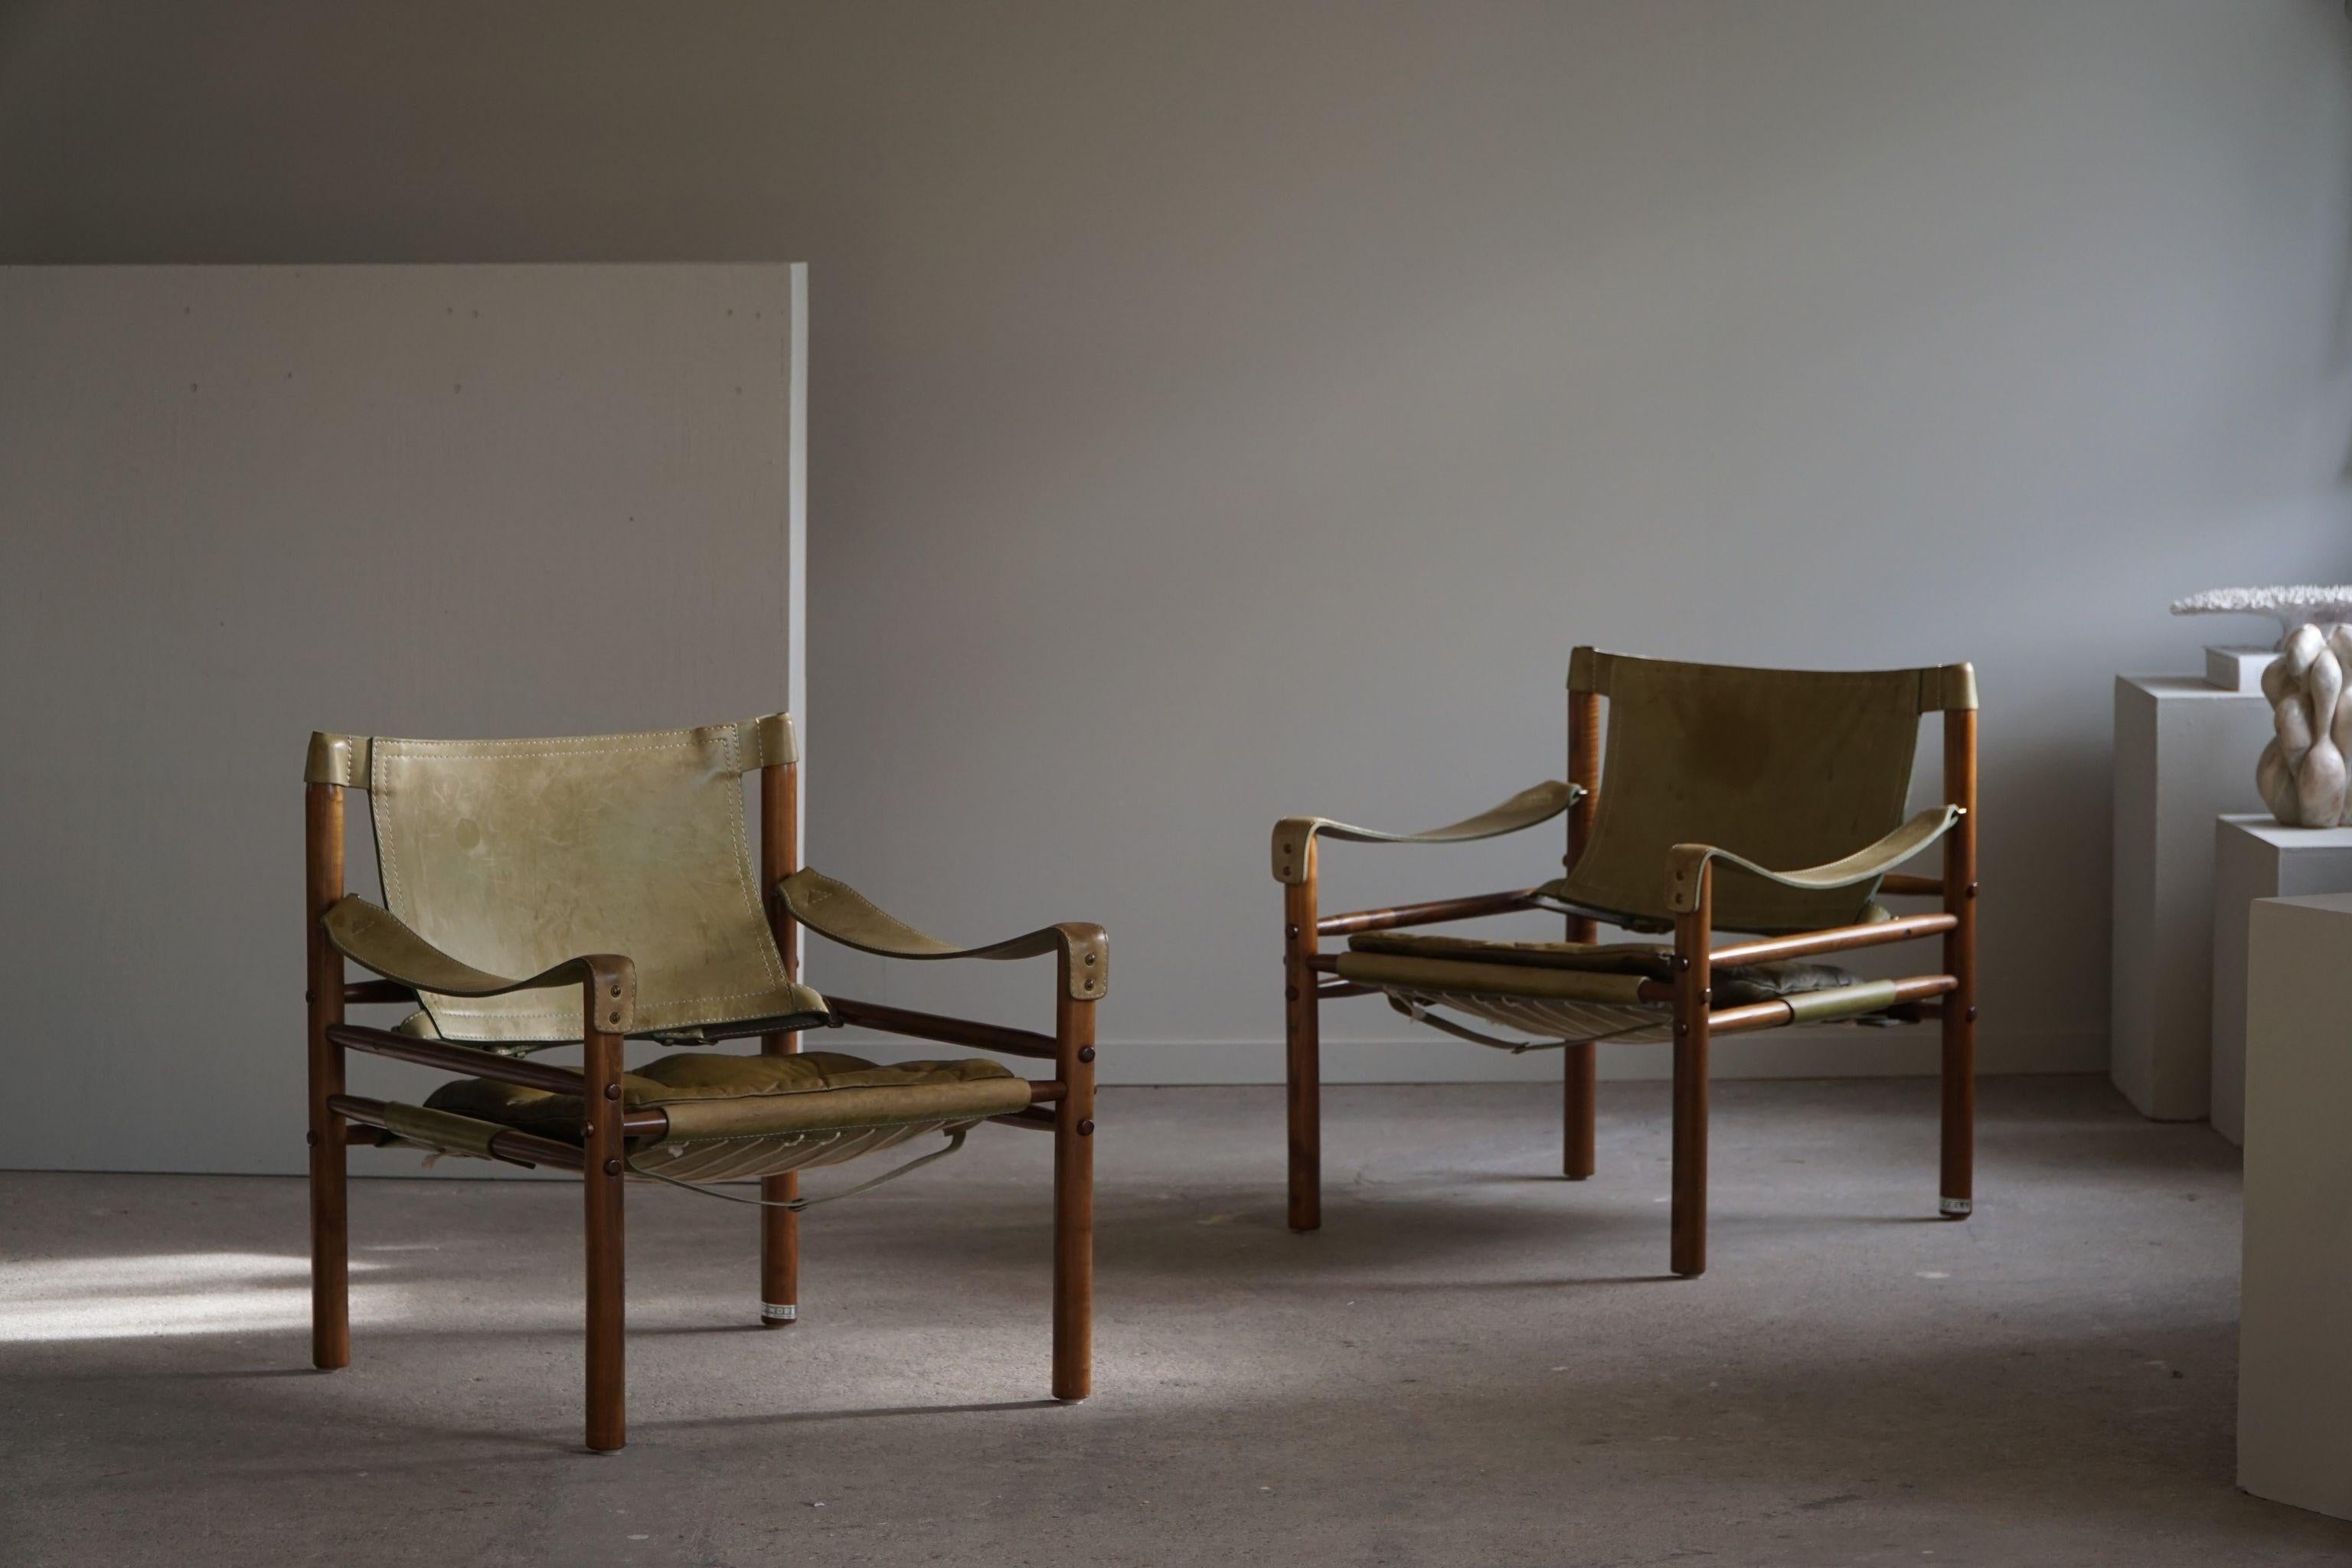 20th Century Pair of Sirocco Safari Chairs, Made by Arne Norell AB in Aneby, Sweden, 1960s